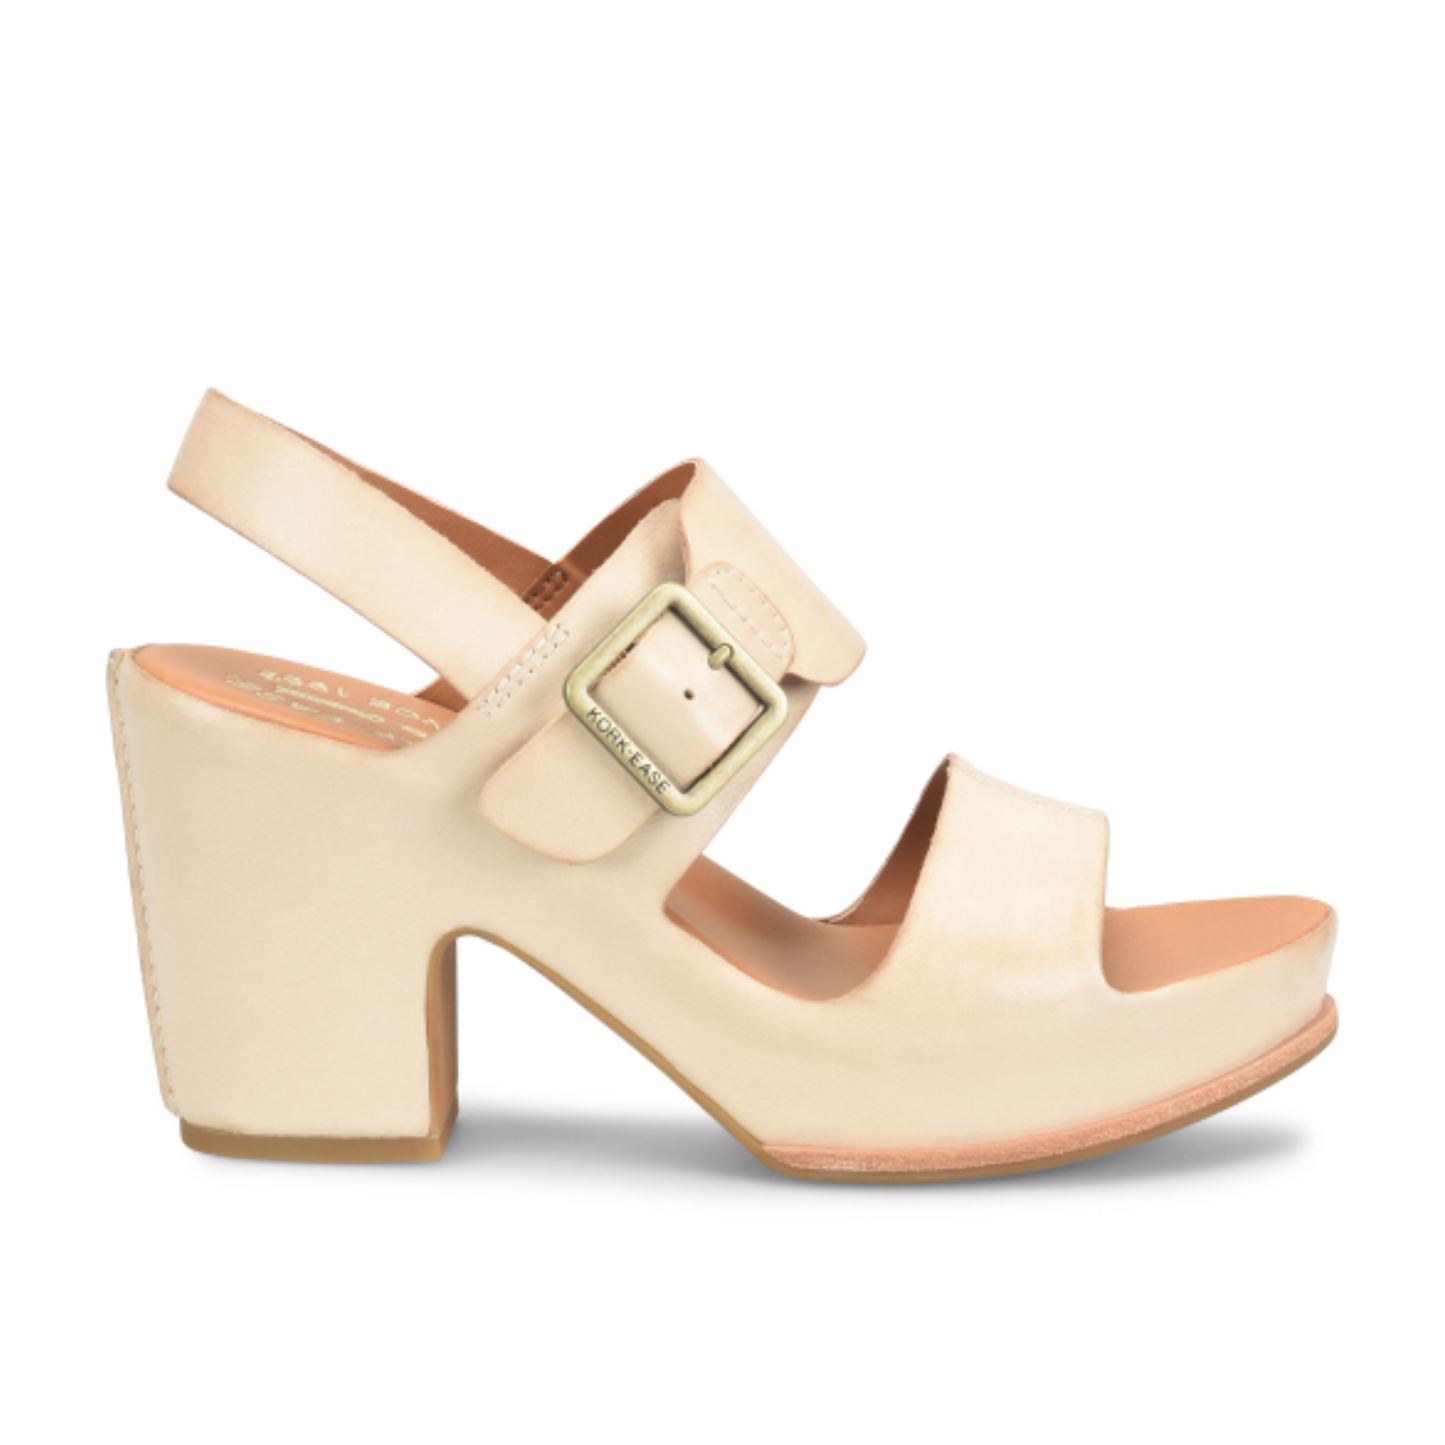 Side view of the Kork-Ease San Carlos Platform Slingback in the color Cream